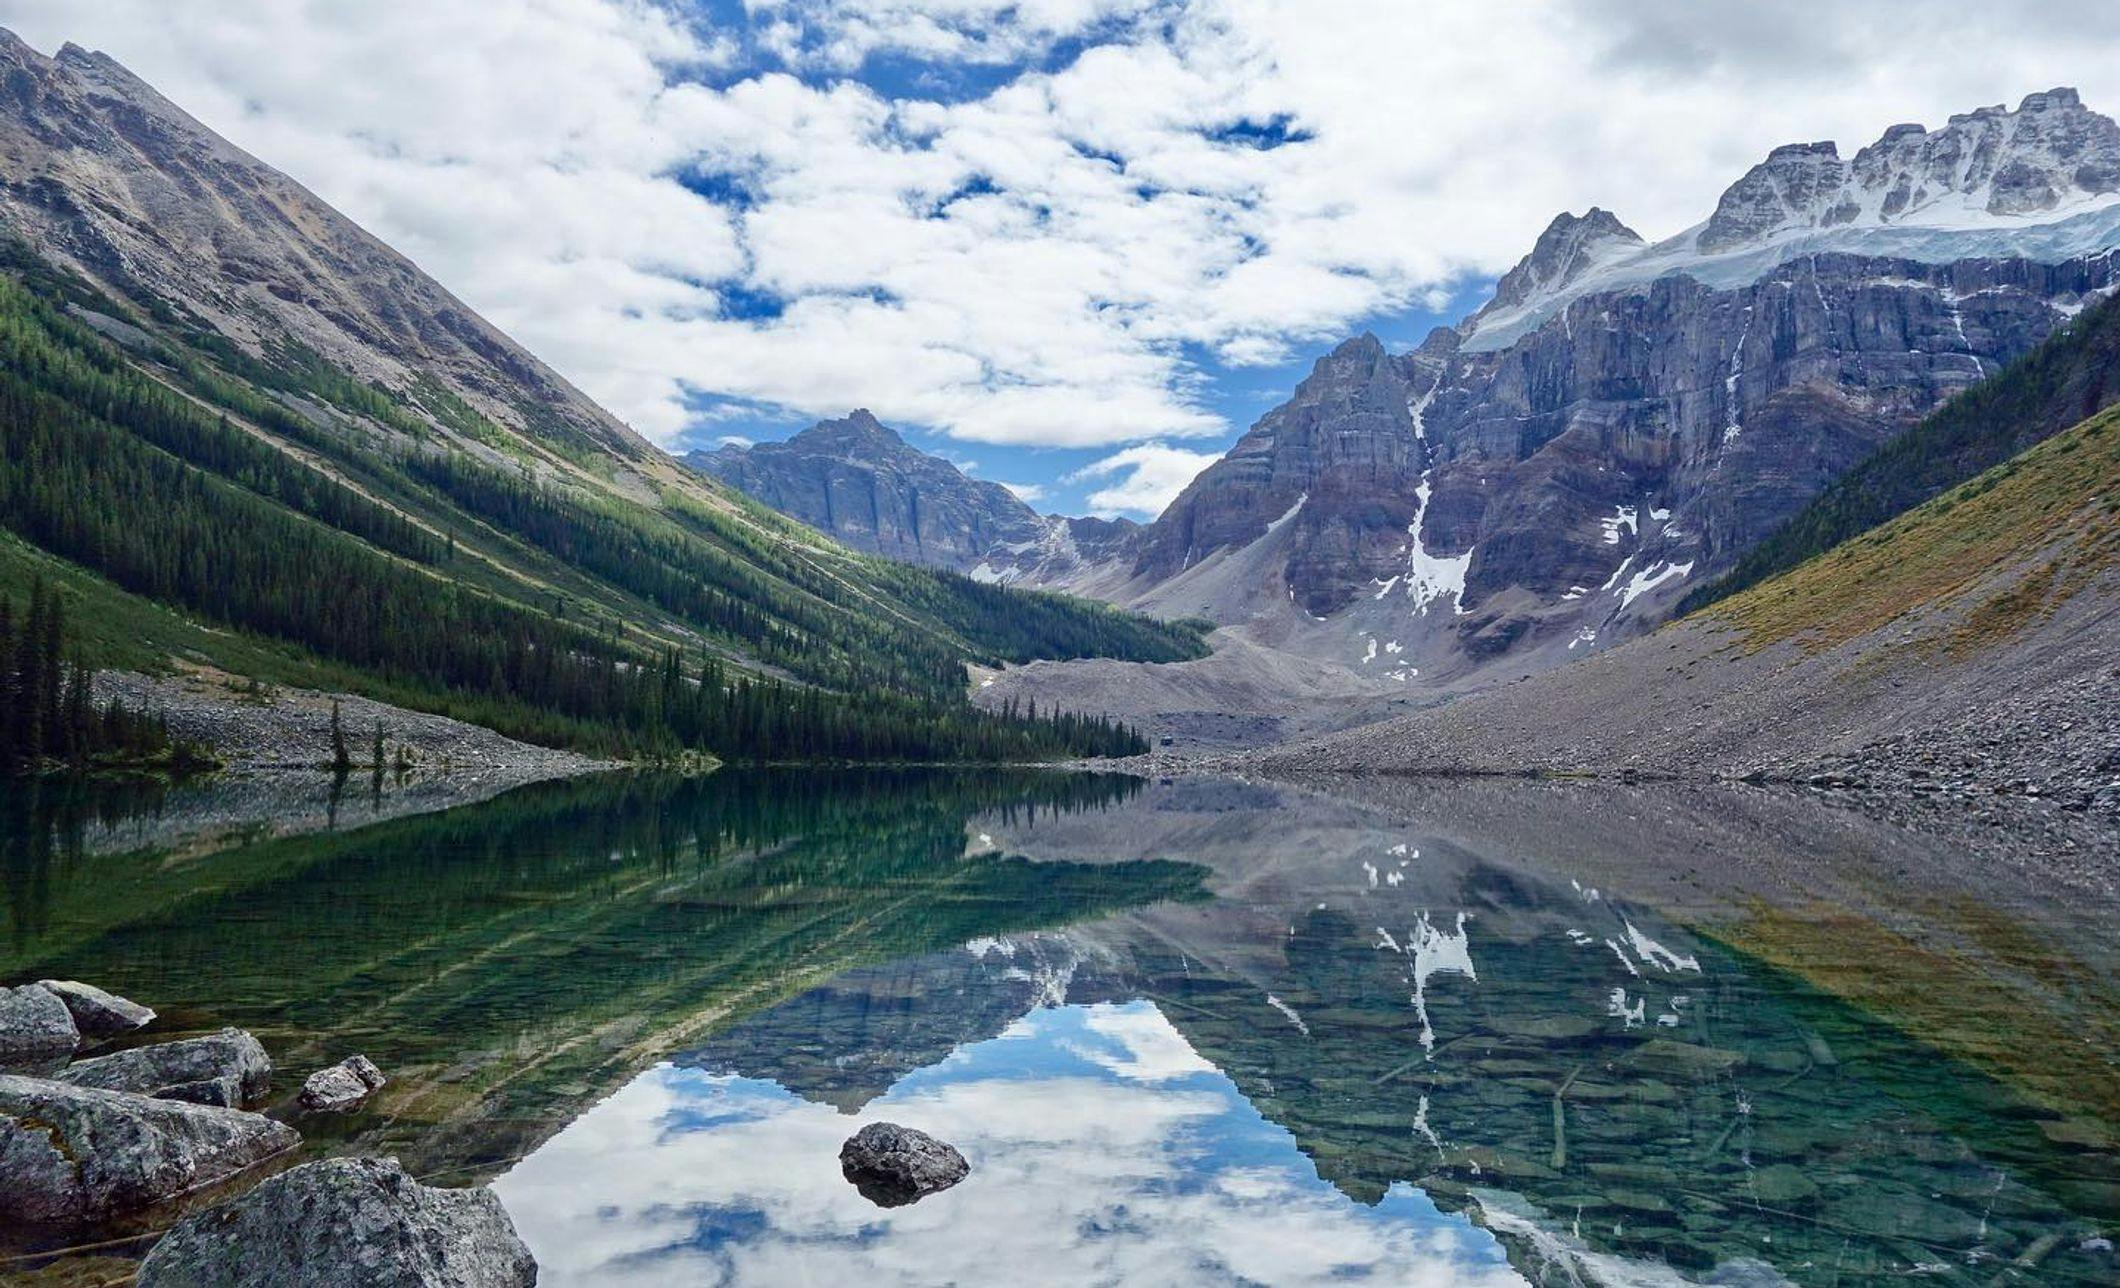 A photo of a clear lake reflecting the trees, snow-capped mountains, and rock formations surrounding it